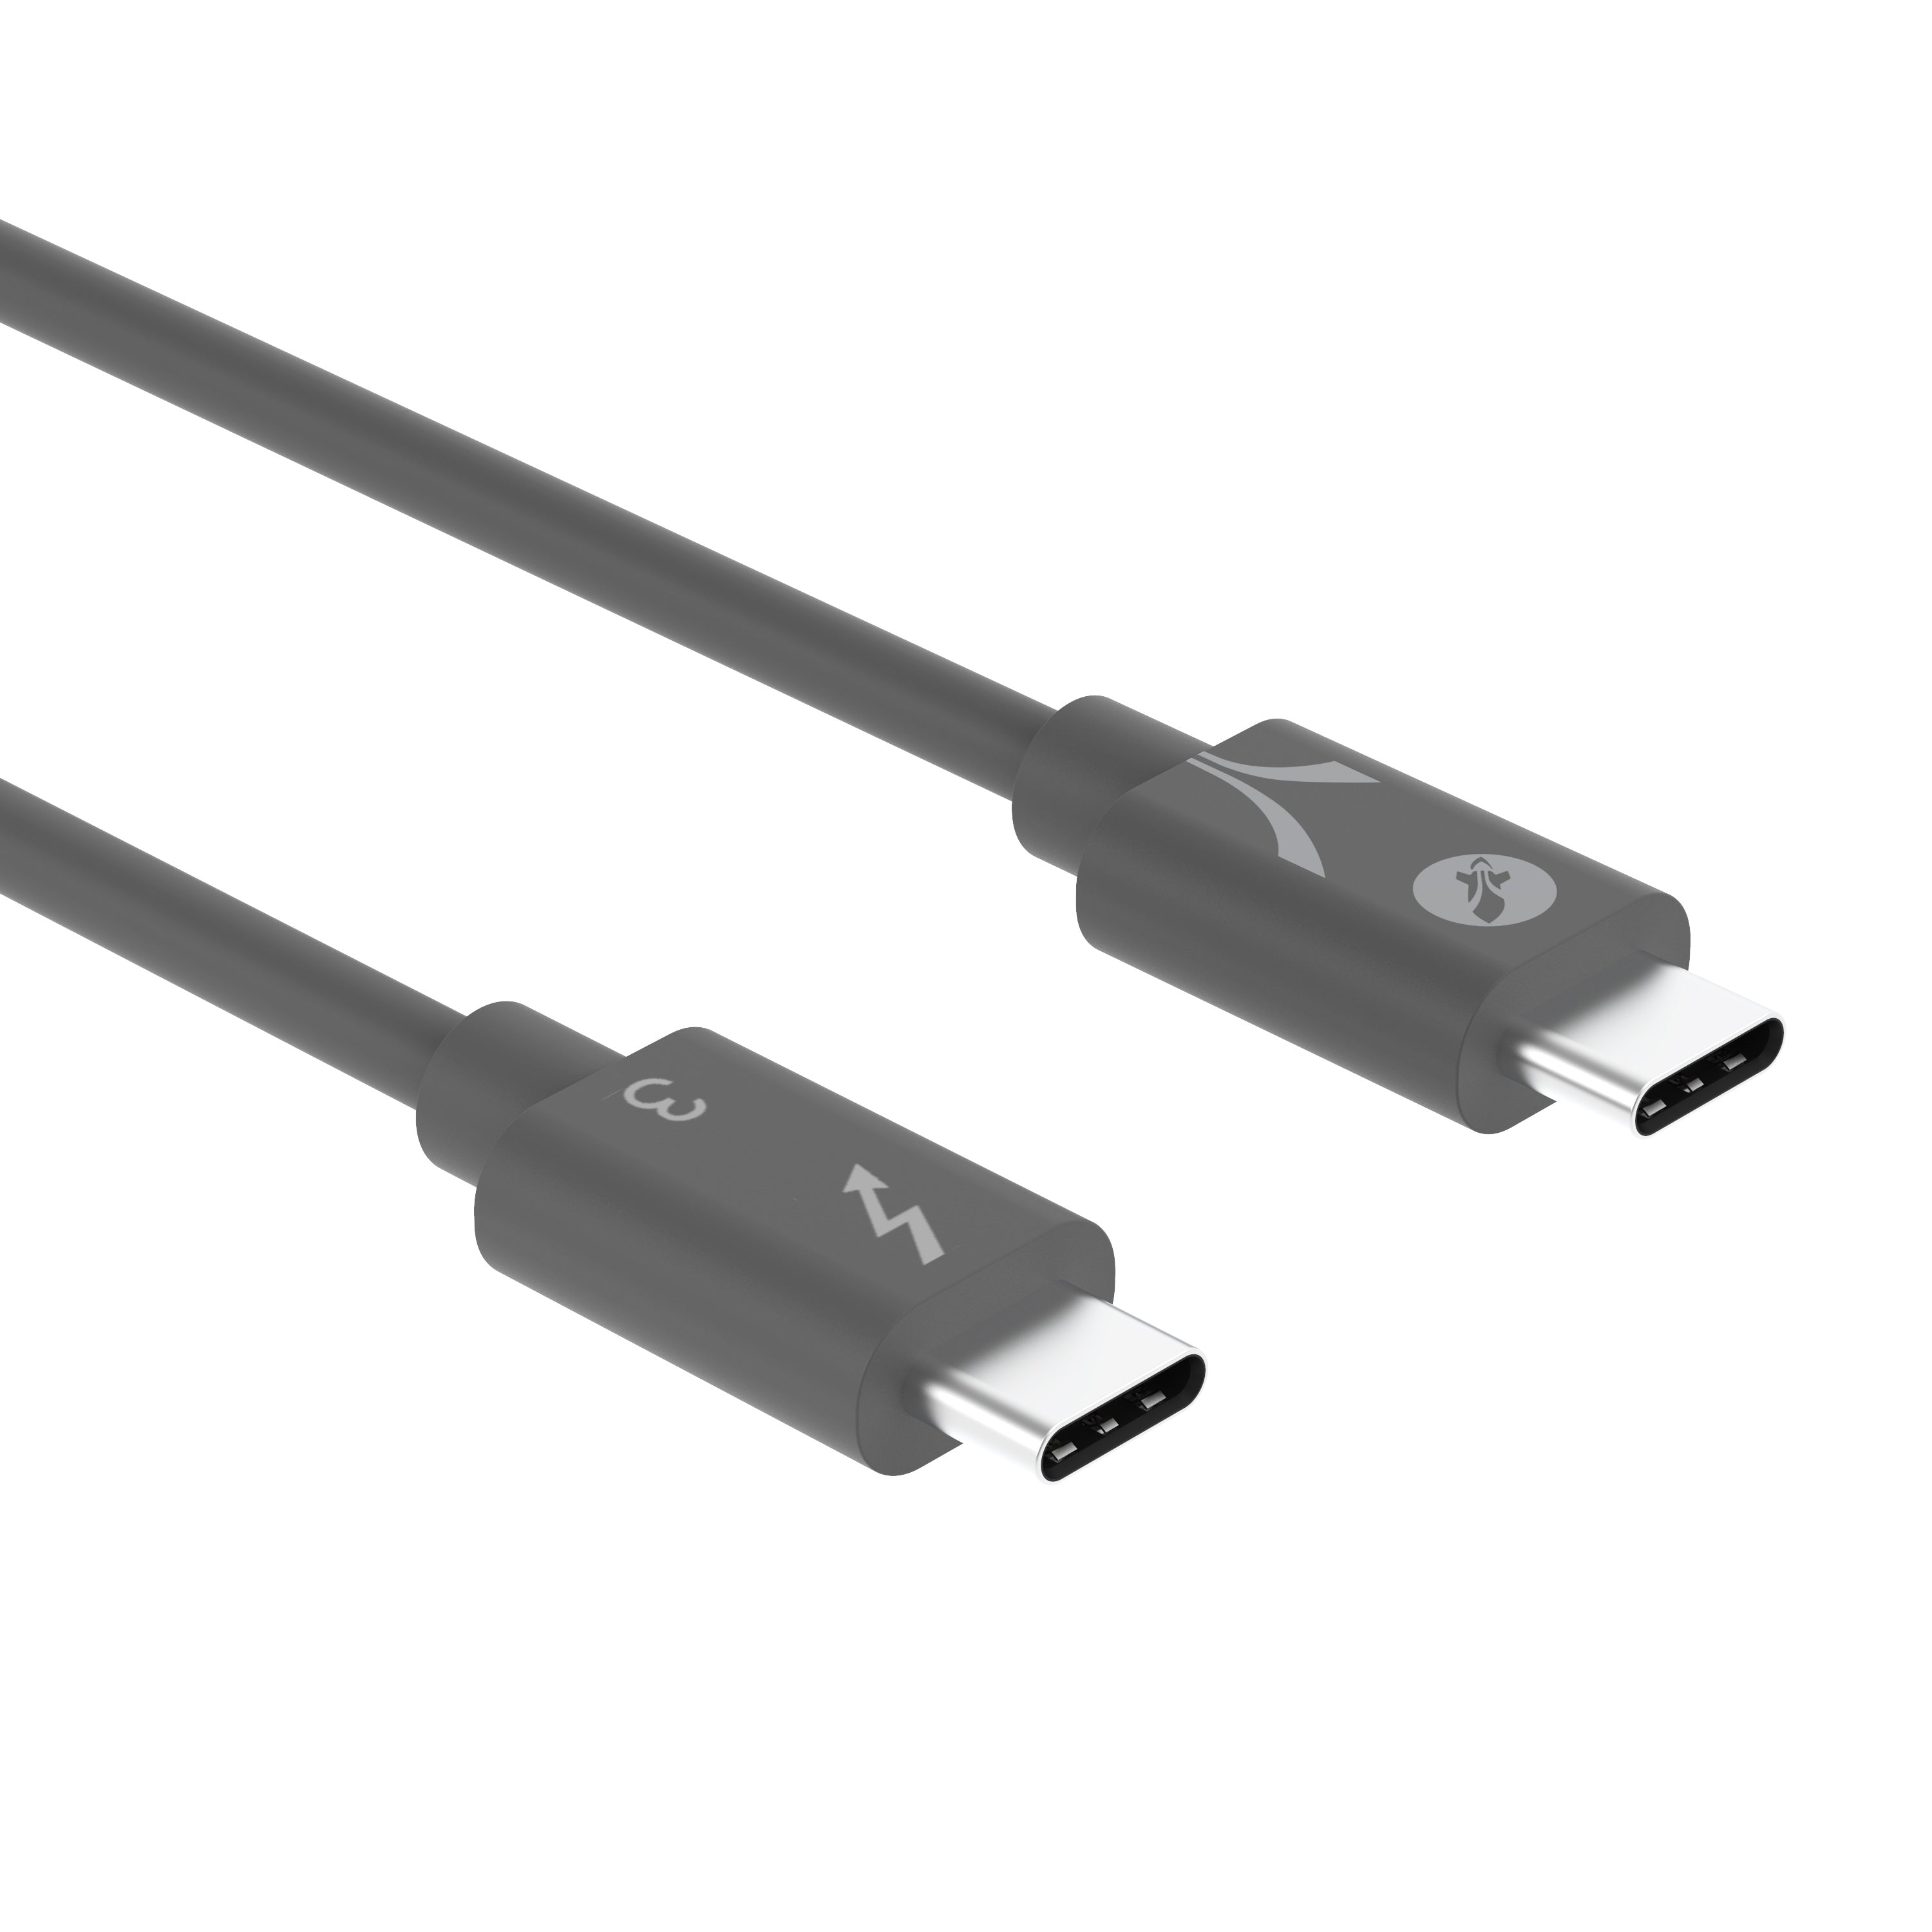 Thunderbolt 3 (Certified) USB Type-C Cable - Sabrent